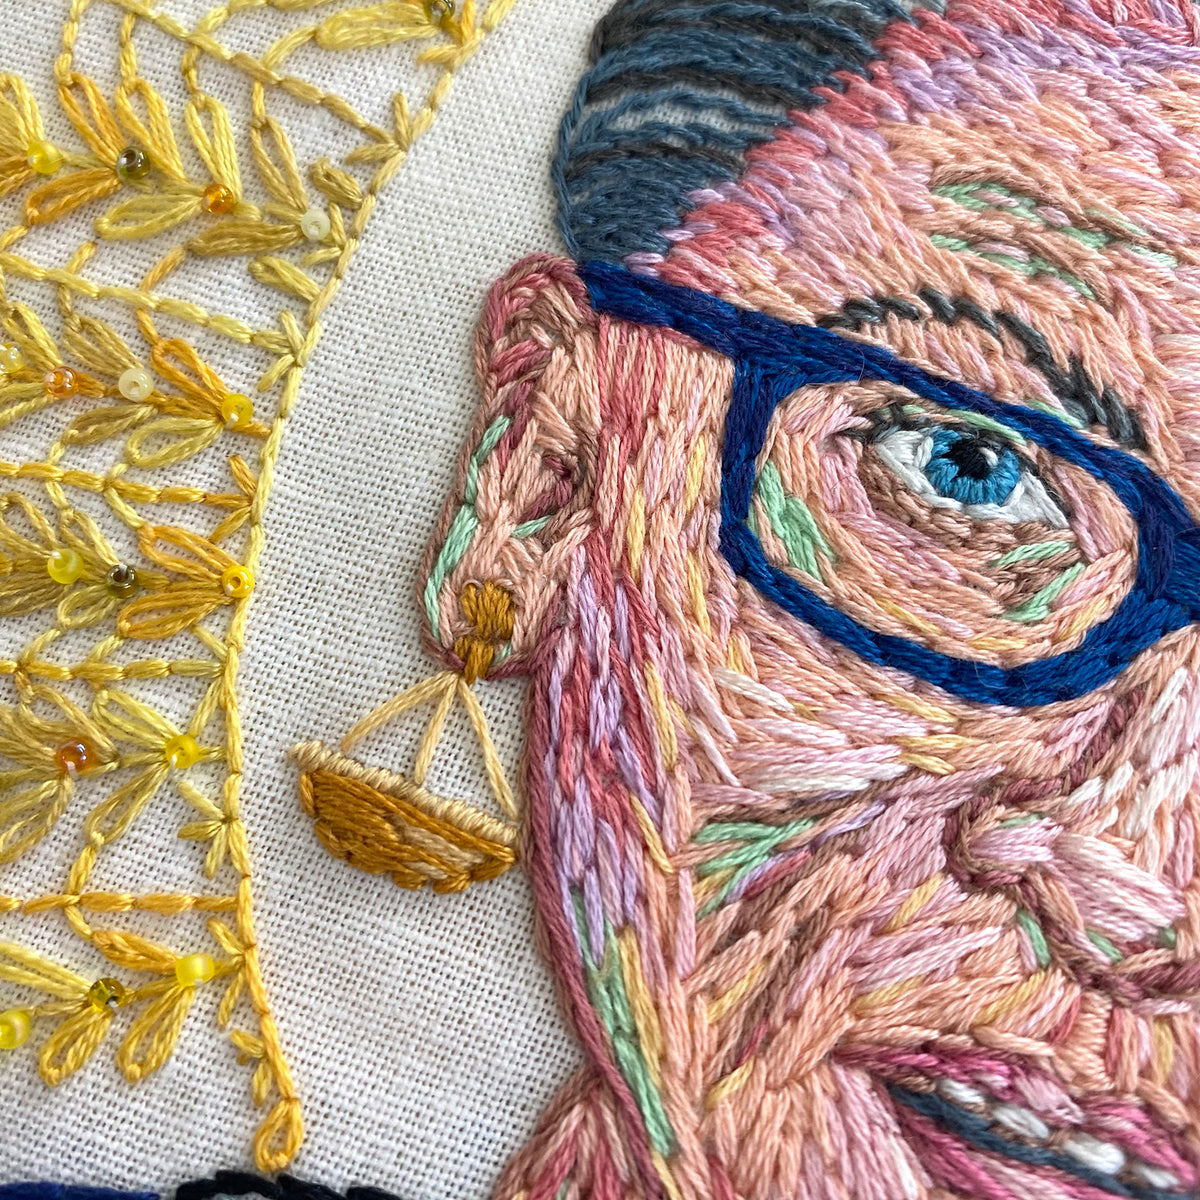 Ruth Bader Ginsburg Printed Fabric Pattern and PDF Embroidery Download